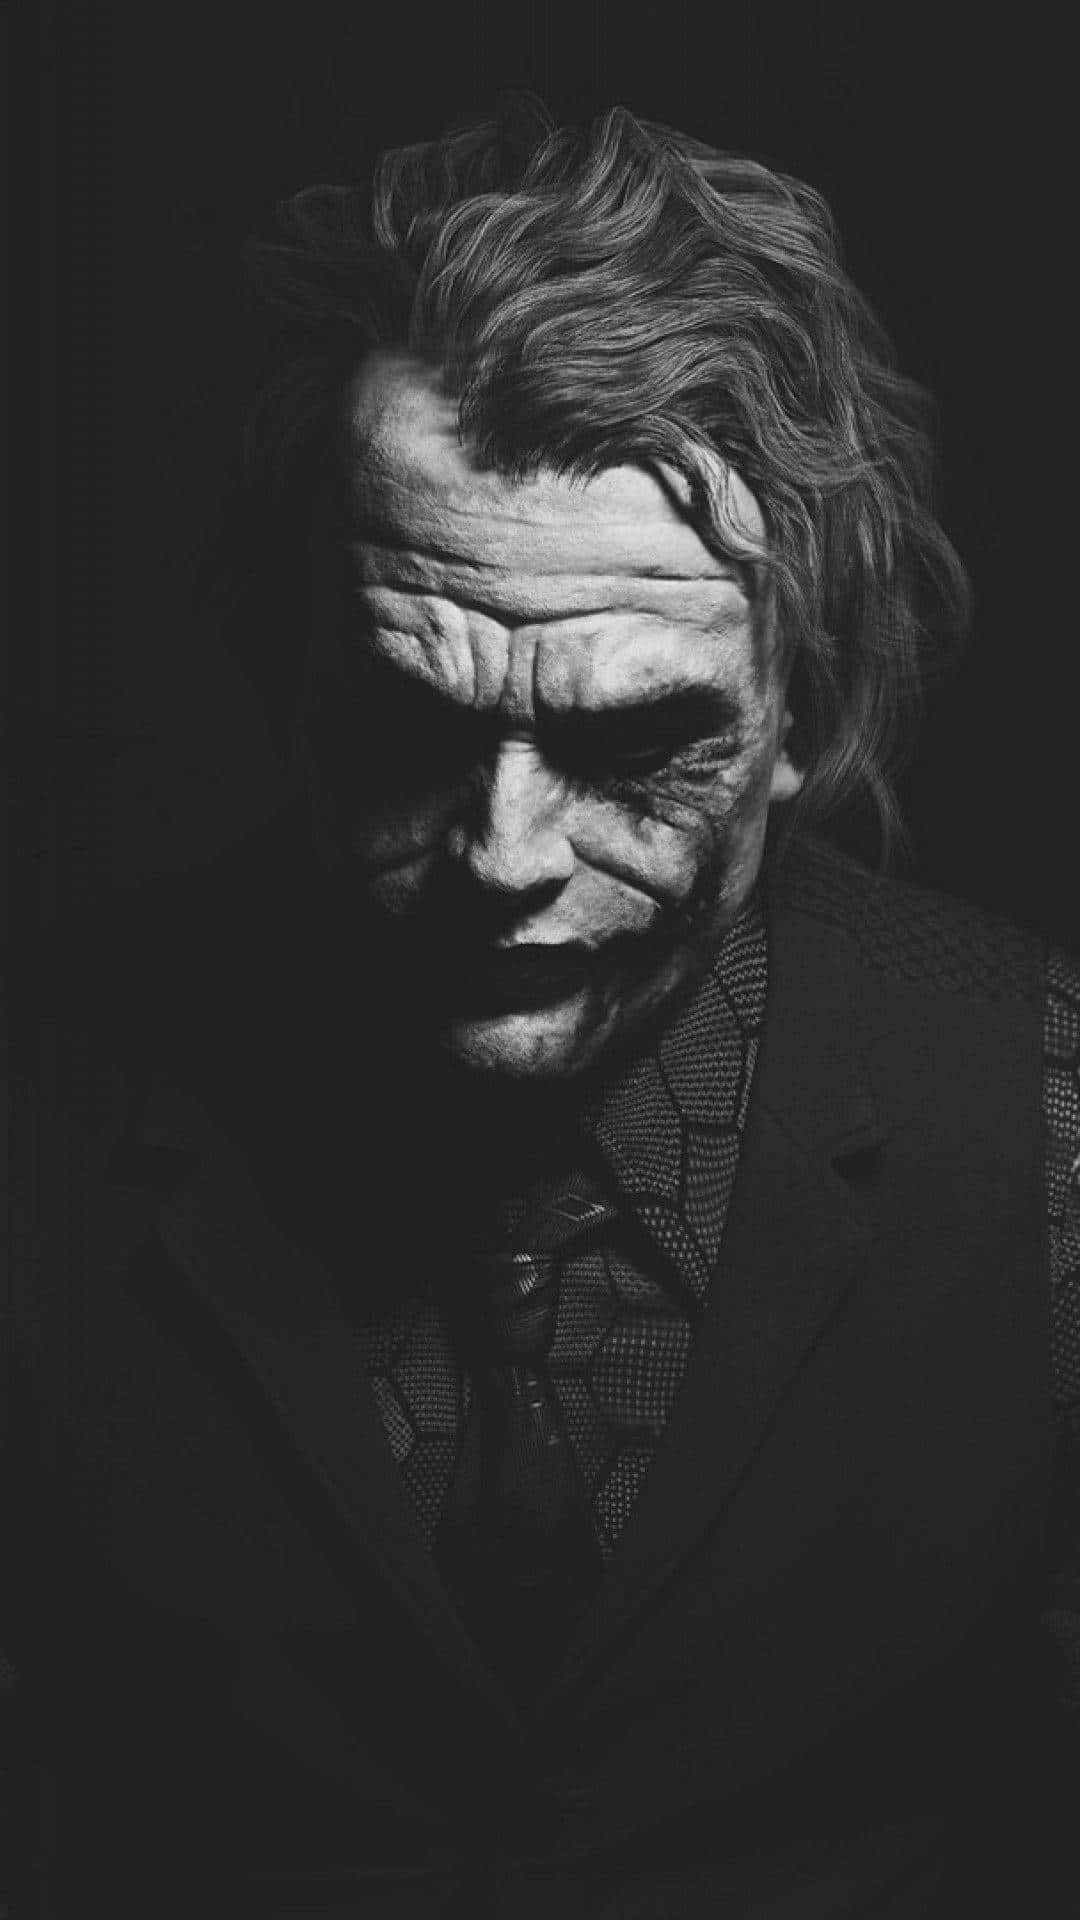 “Why so serious?” Wallpaper